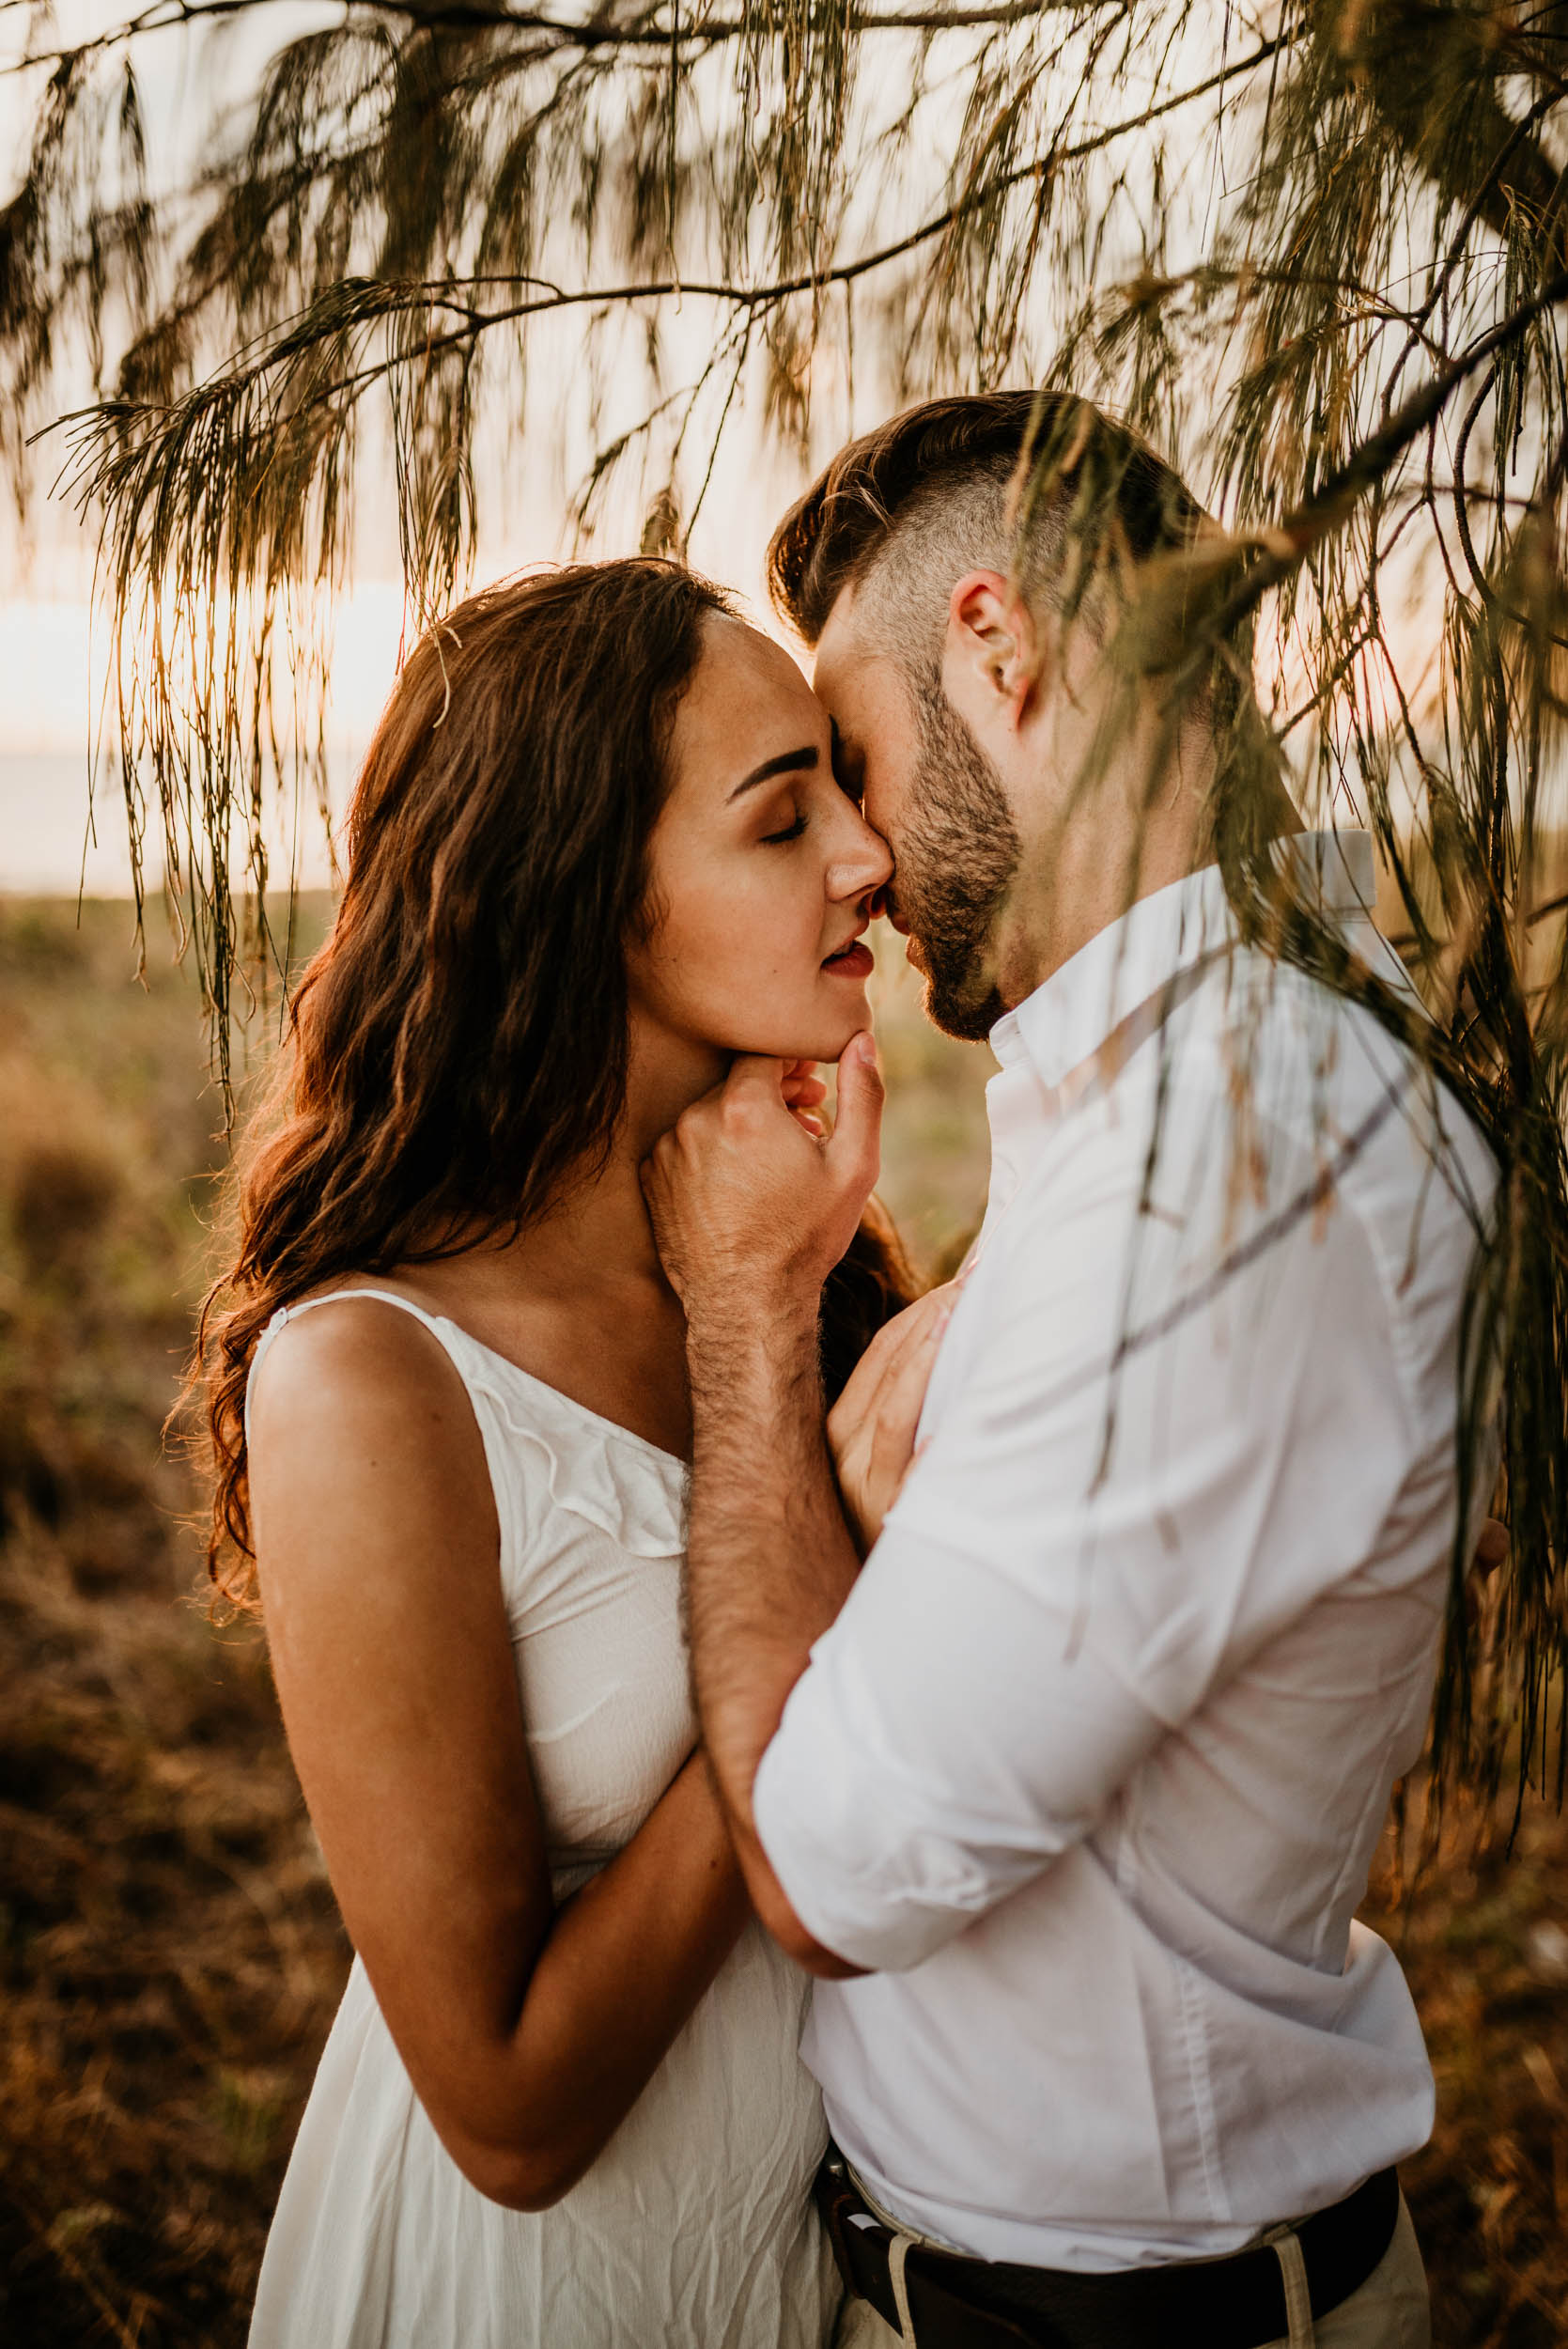 The Raw Photographer - Cairns Wedding Photographer - Engaged Engagement - Beach location - Candid Photography Queensland-21.jpg